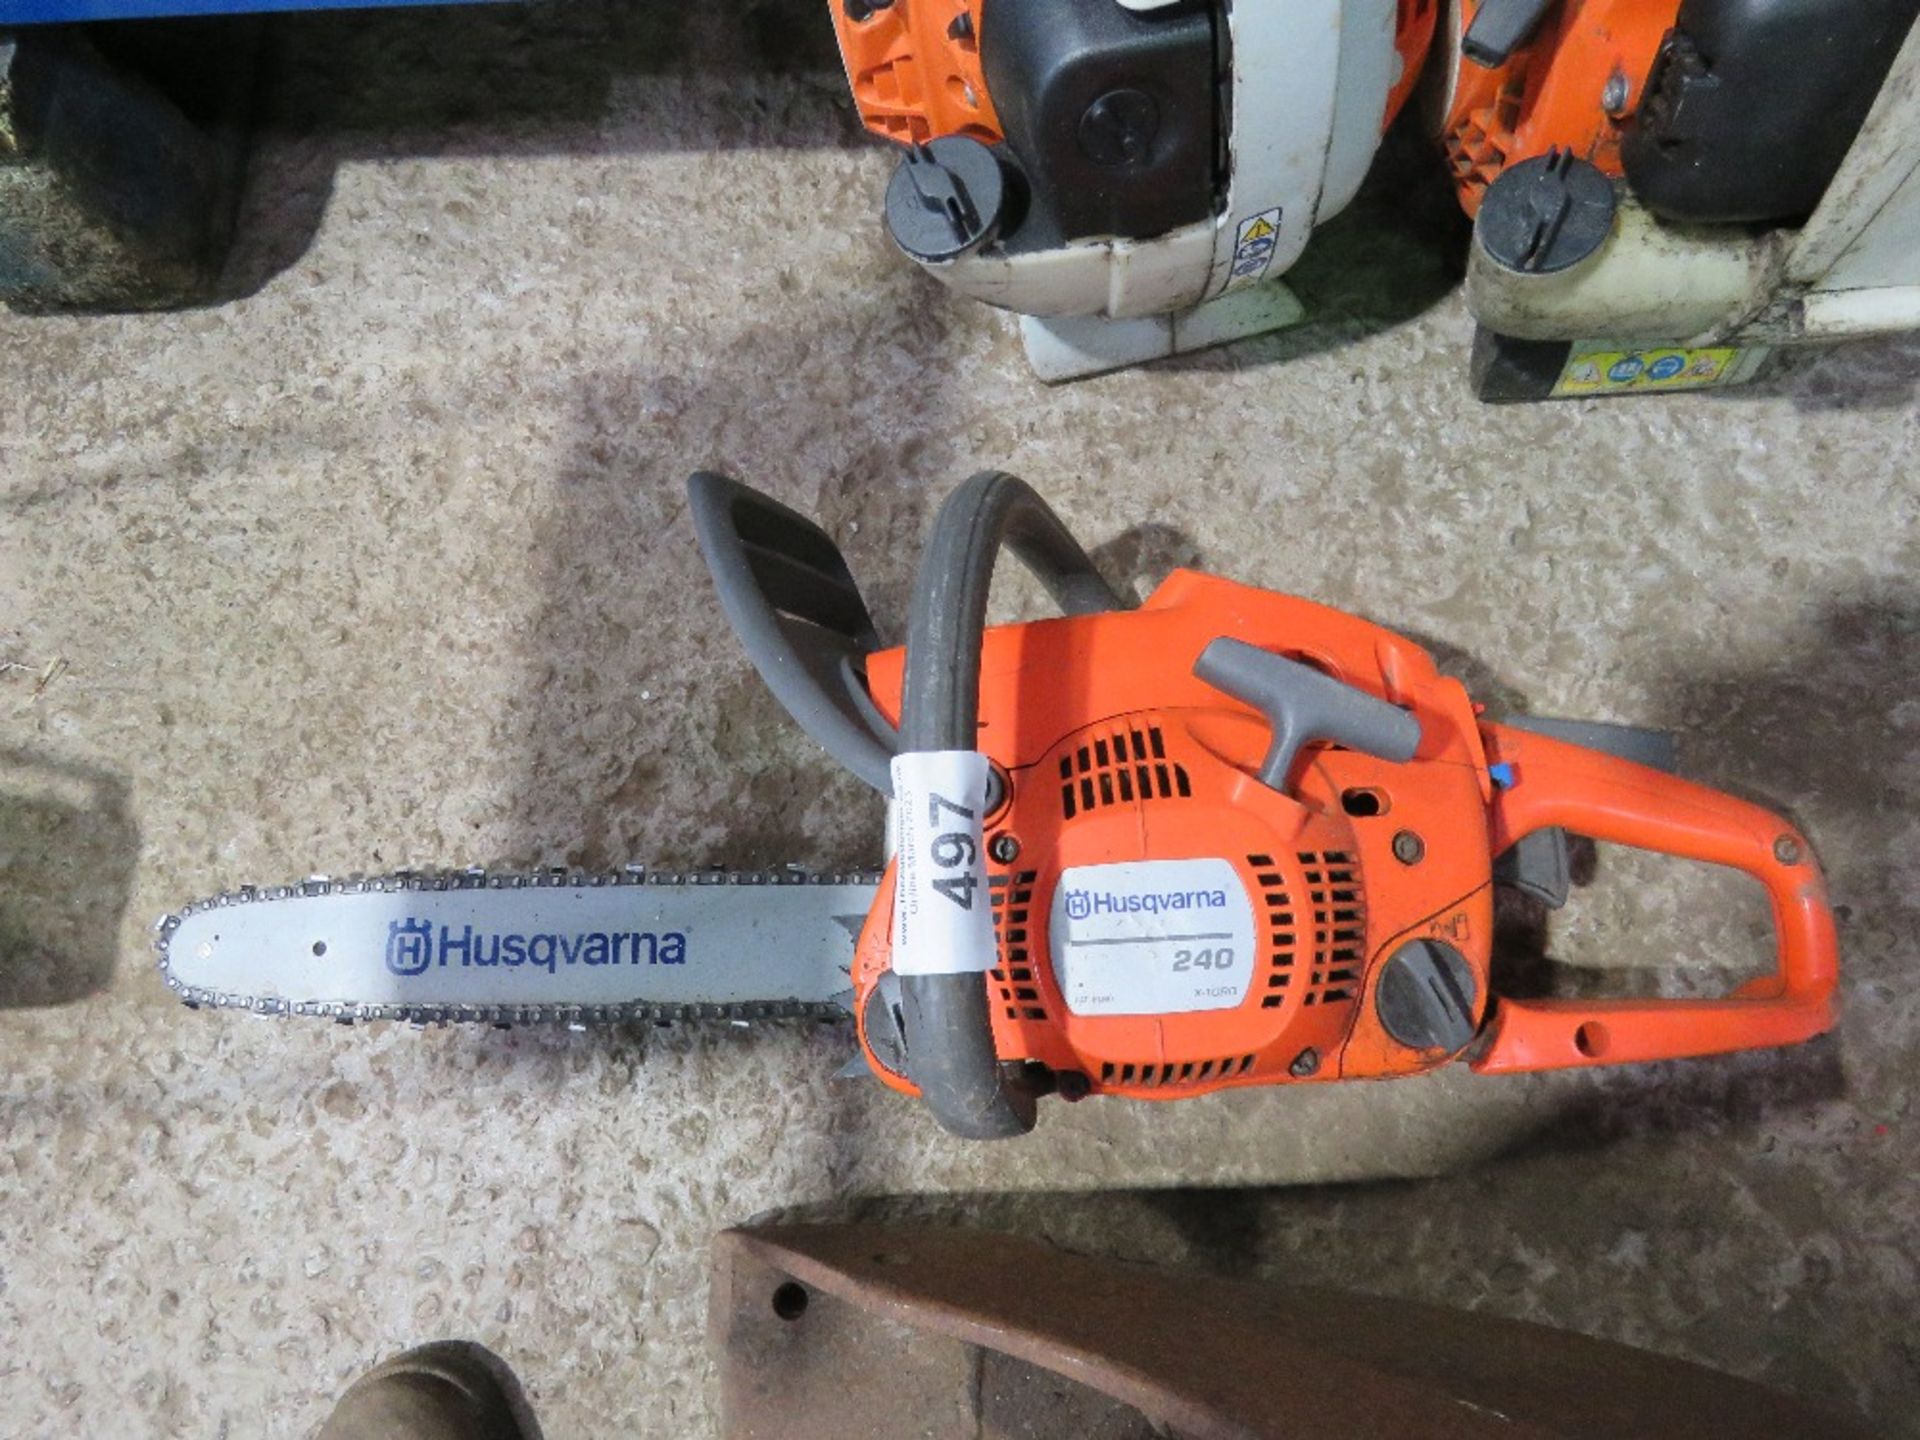 HUSQVARNA 240 PETROL CHAINSAW. THIS LOT IS SOLD UNDER THE AUCTIONEERS MARGIN SCHEME, THEREFORE NO